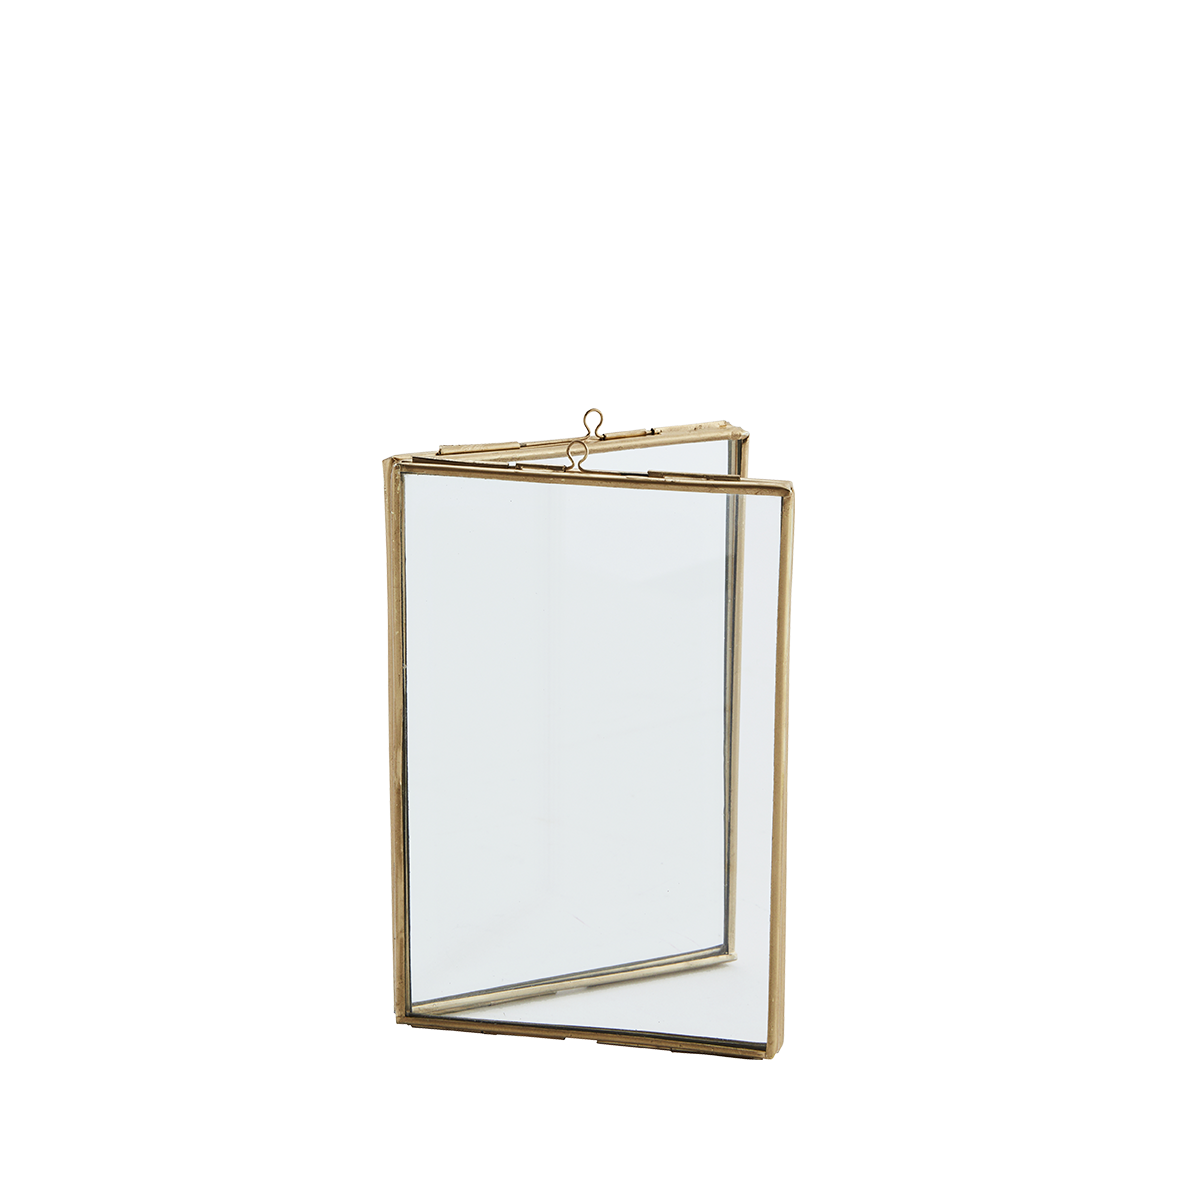 Standing double photo frame